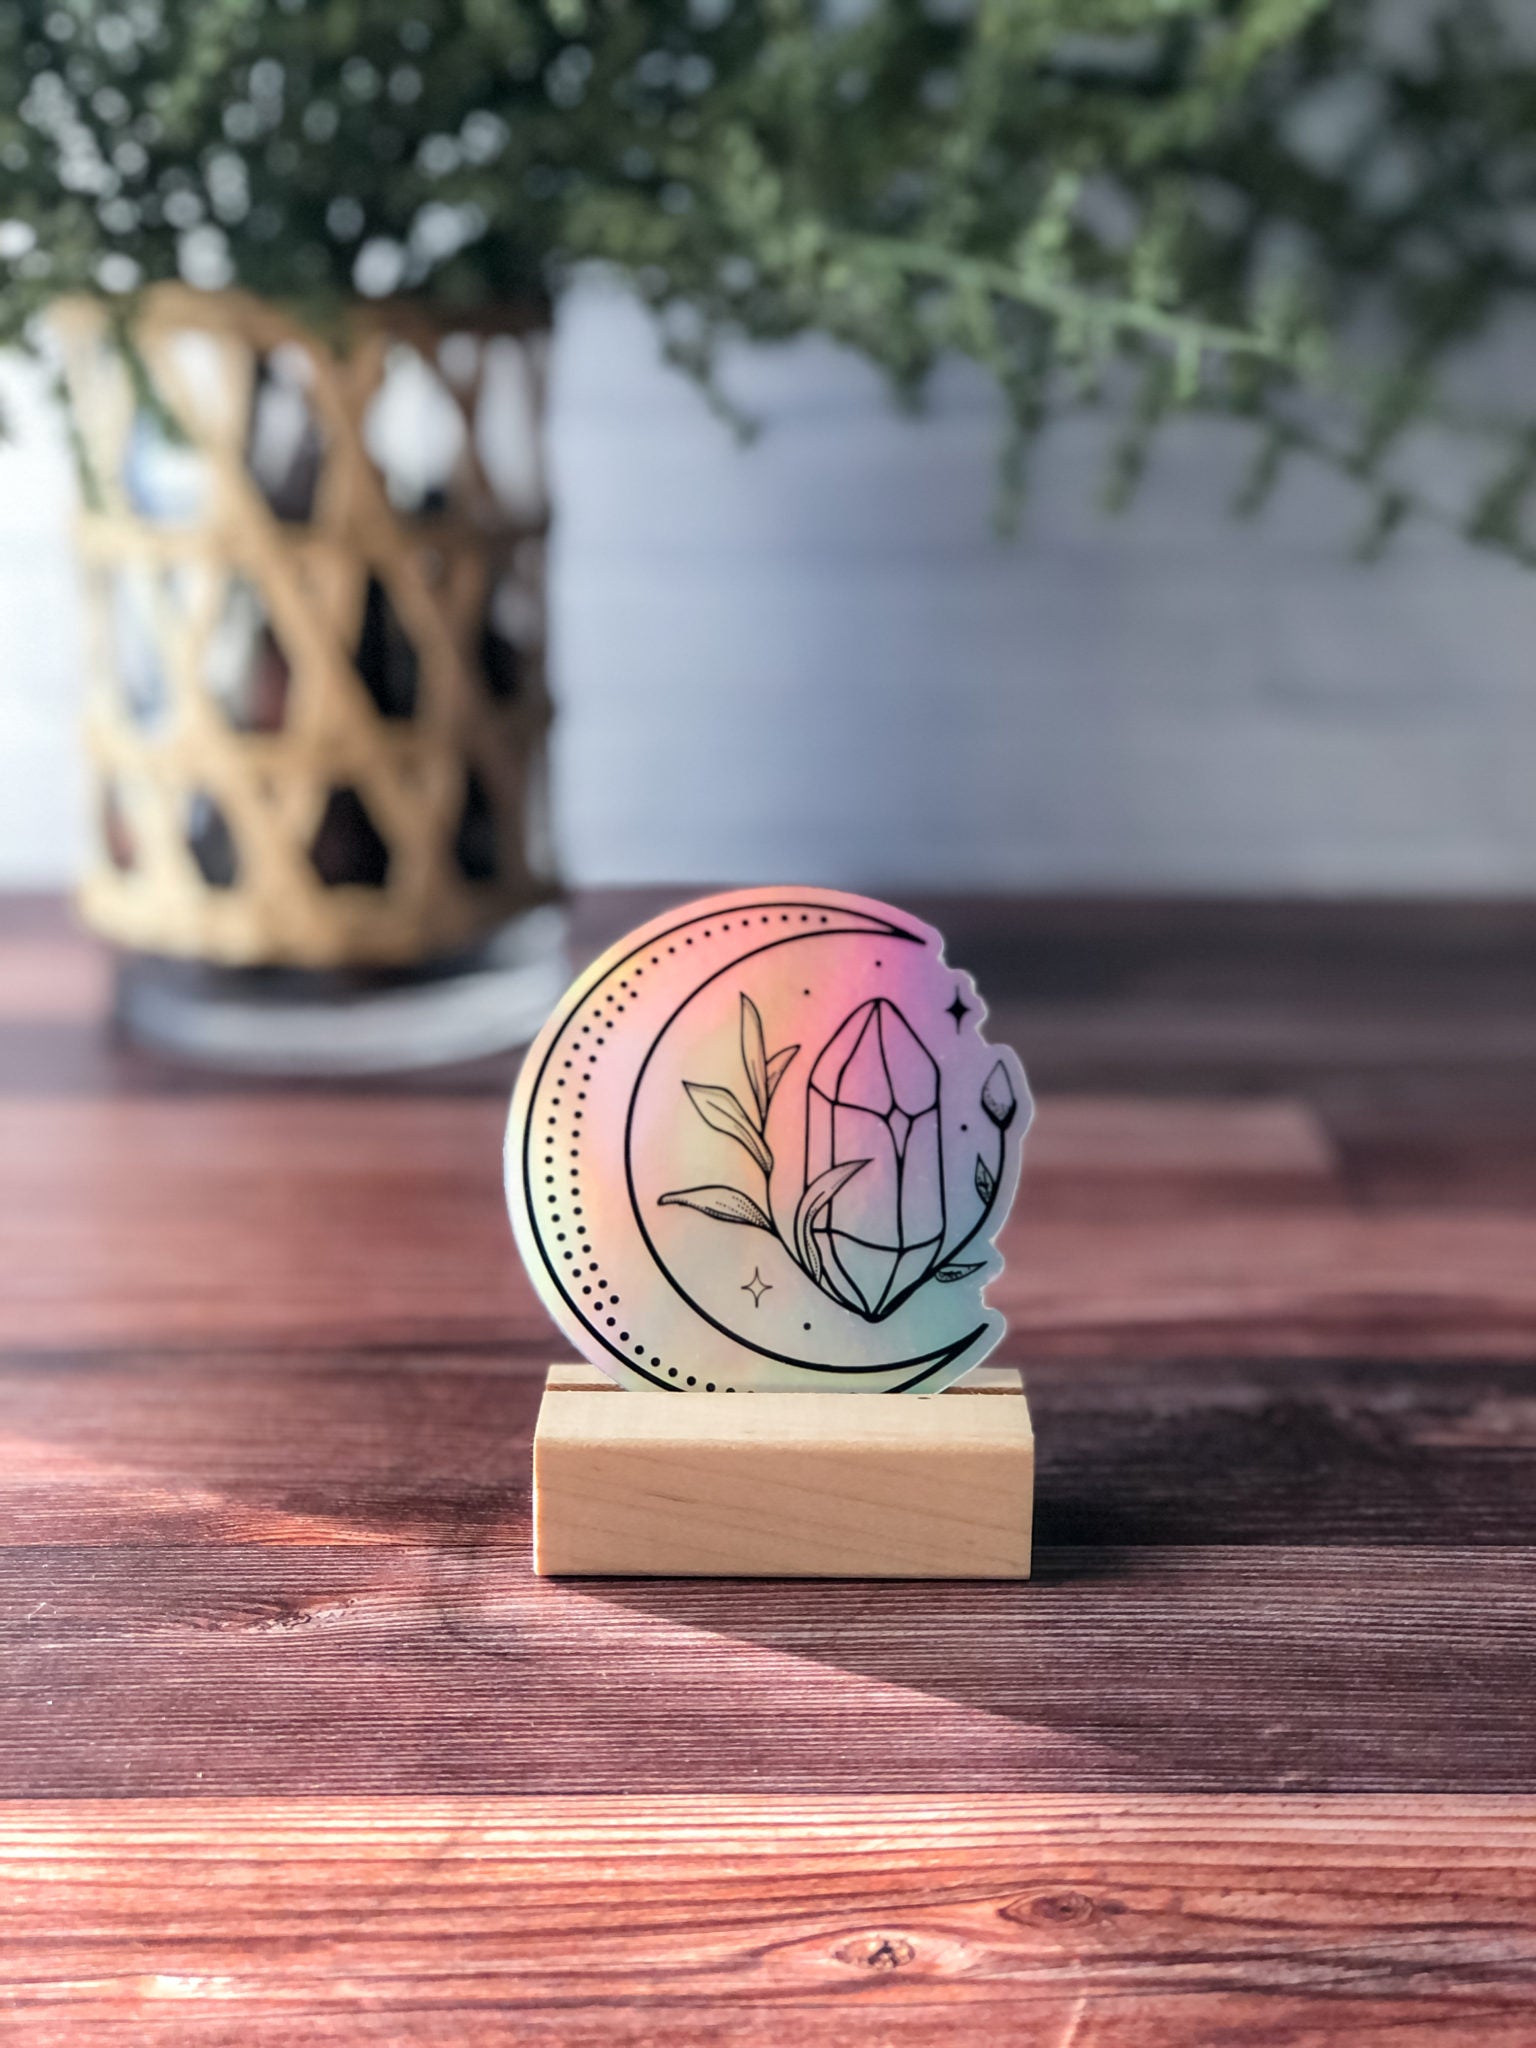 shiny holographic moon & crystal sticker with rainbow iridescent finish. sticker design is crescent moon black outline with crystal, stars, and leafy accents